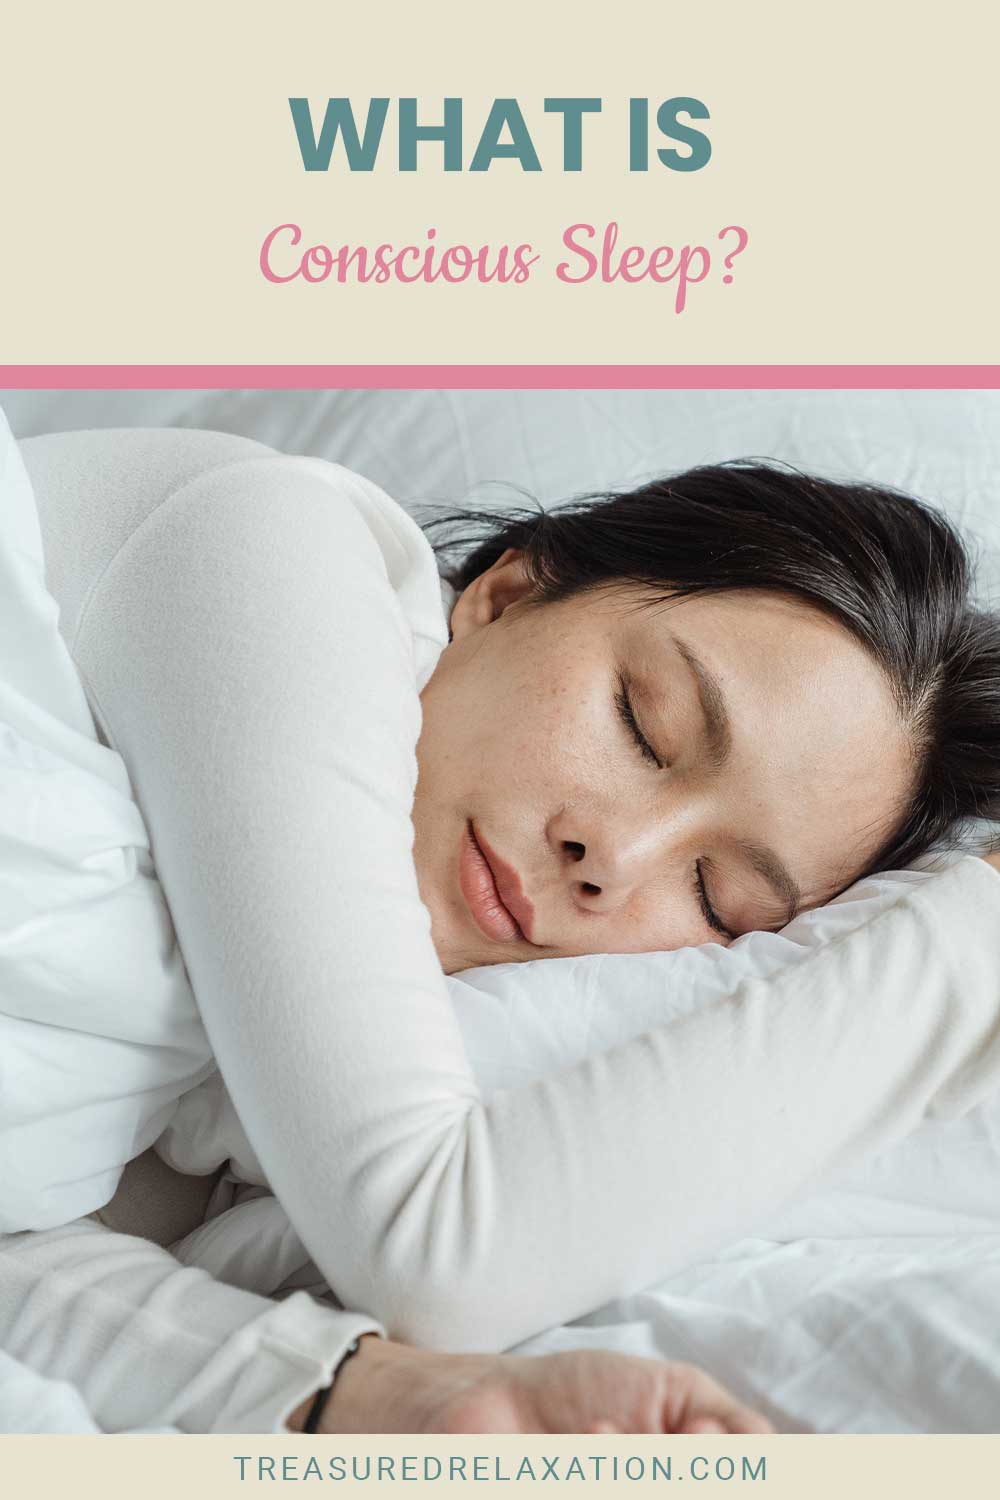 What is Conscious Sleep?